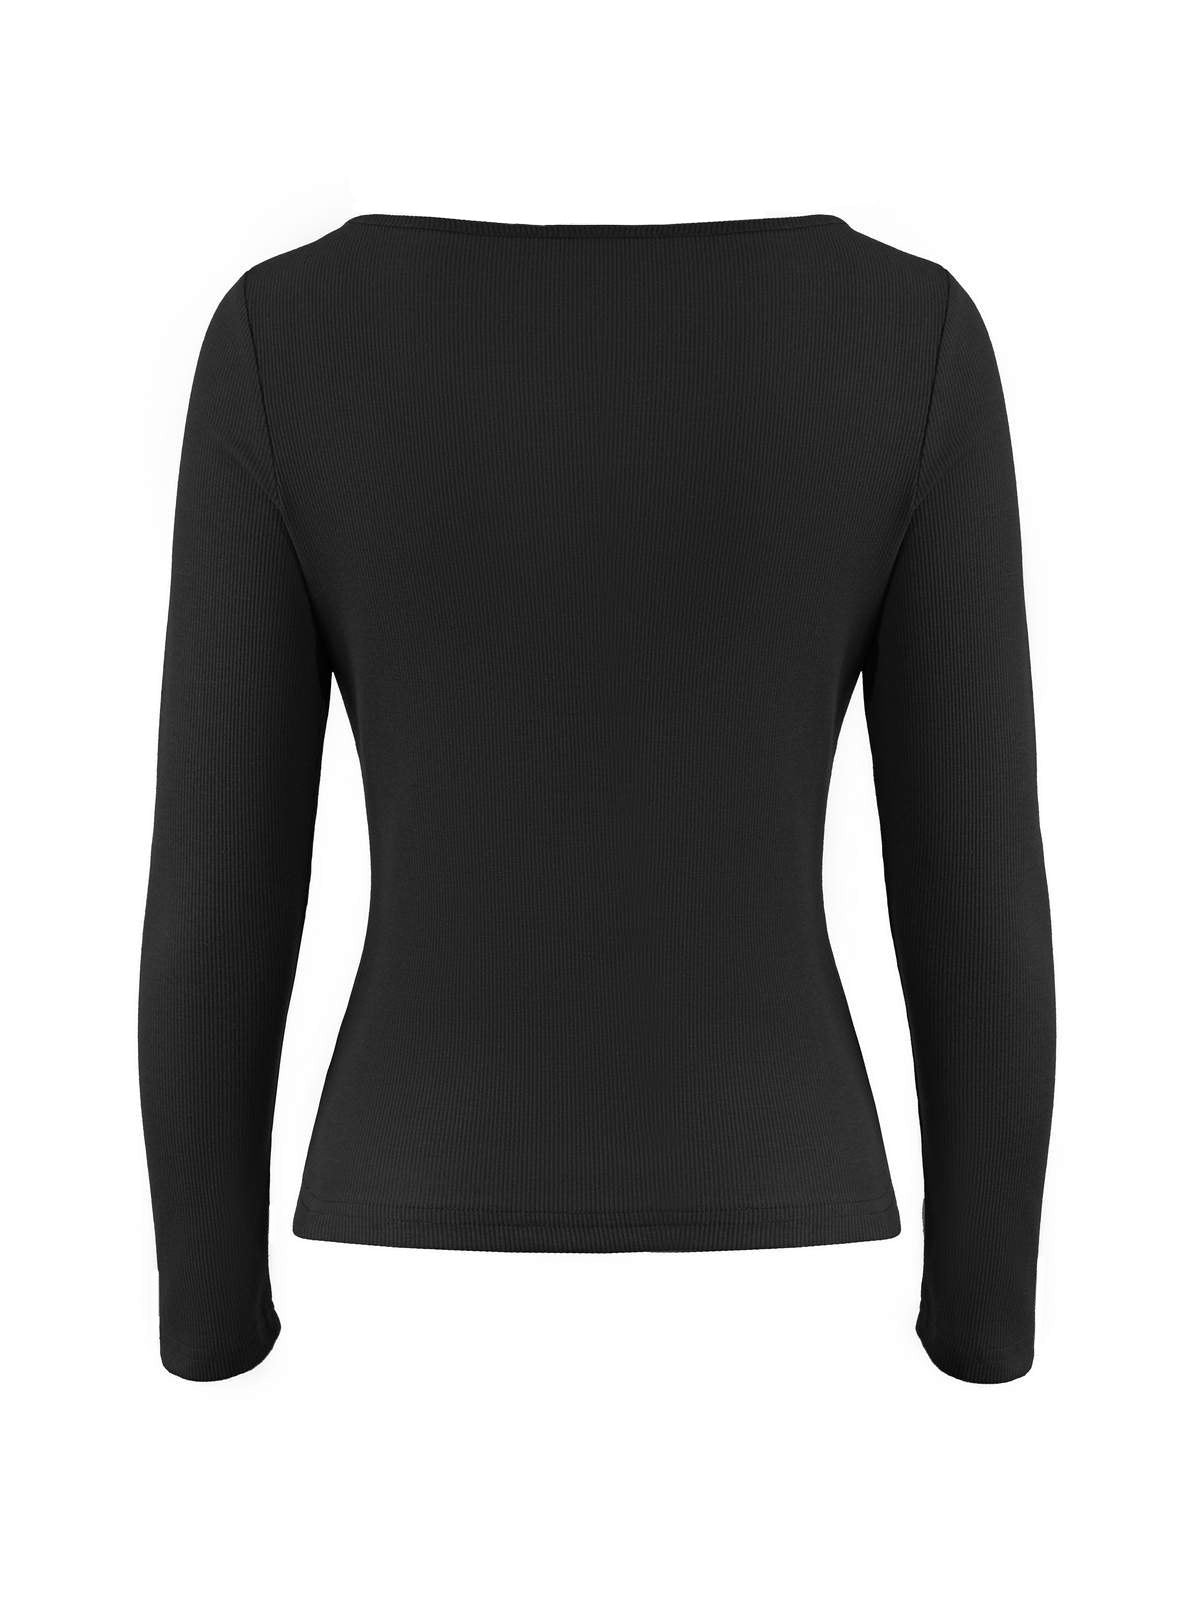 Black Long Sleeve Knit Top with Lace Detail